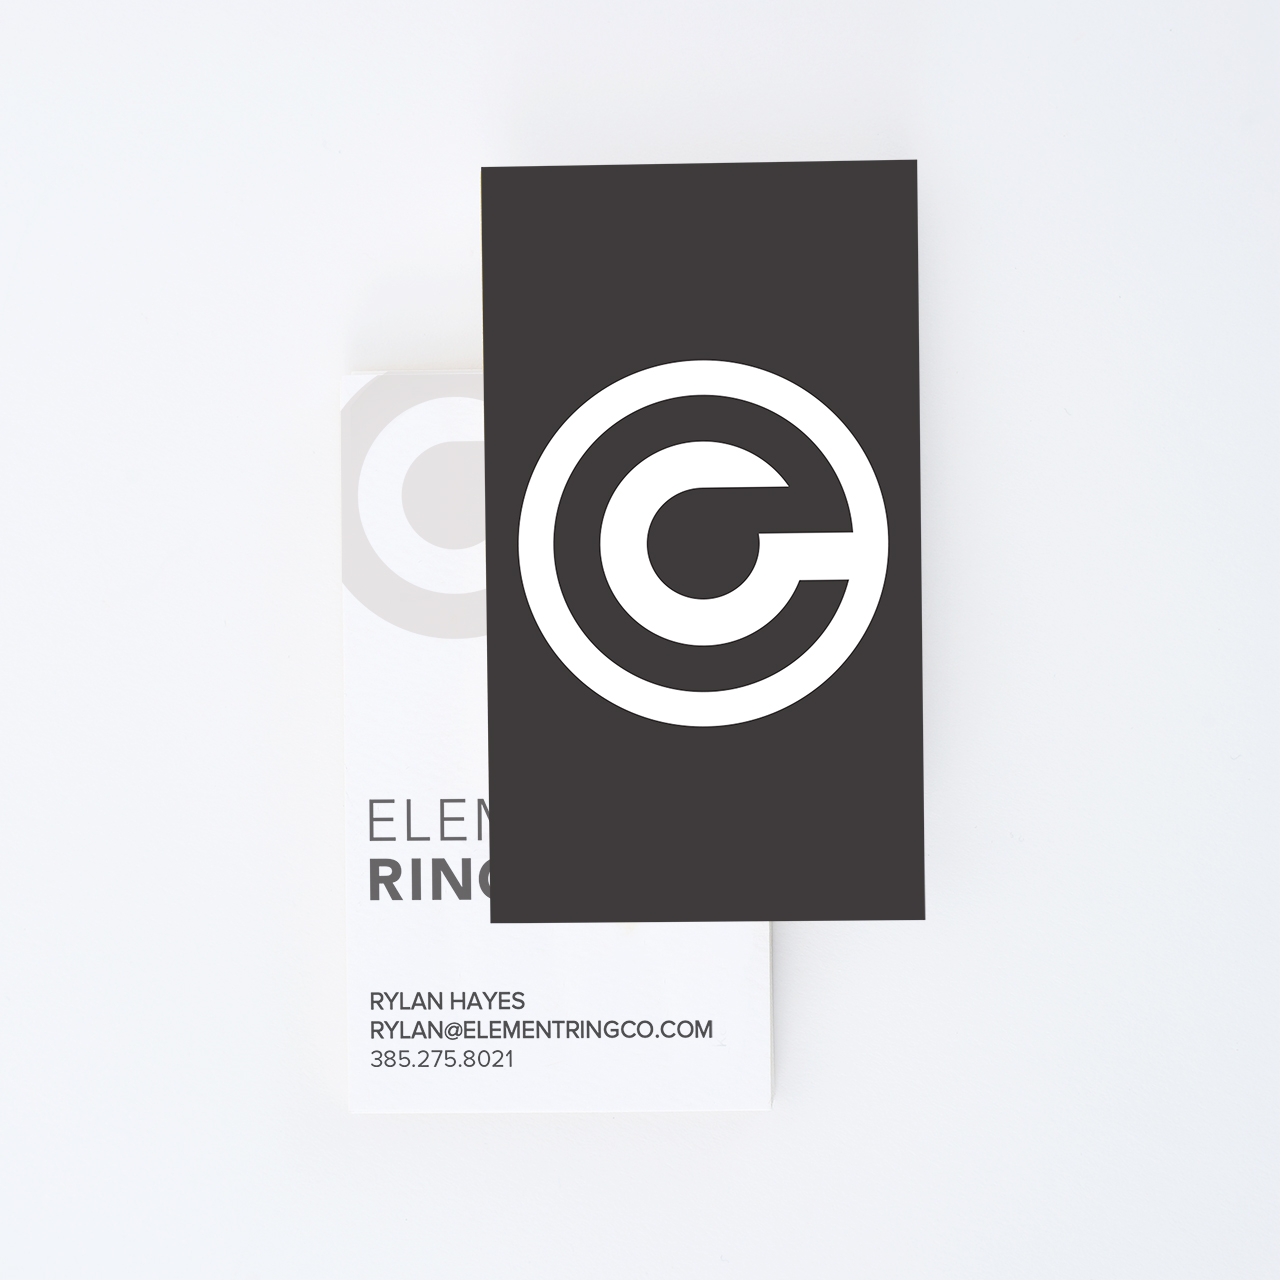 Design your own business cards